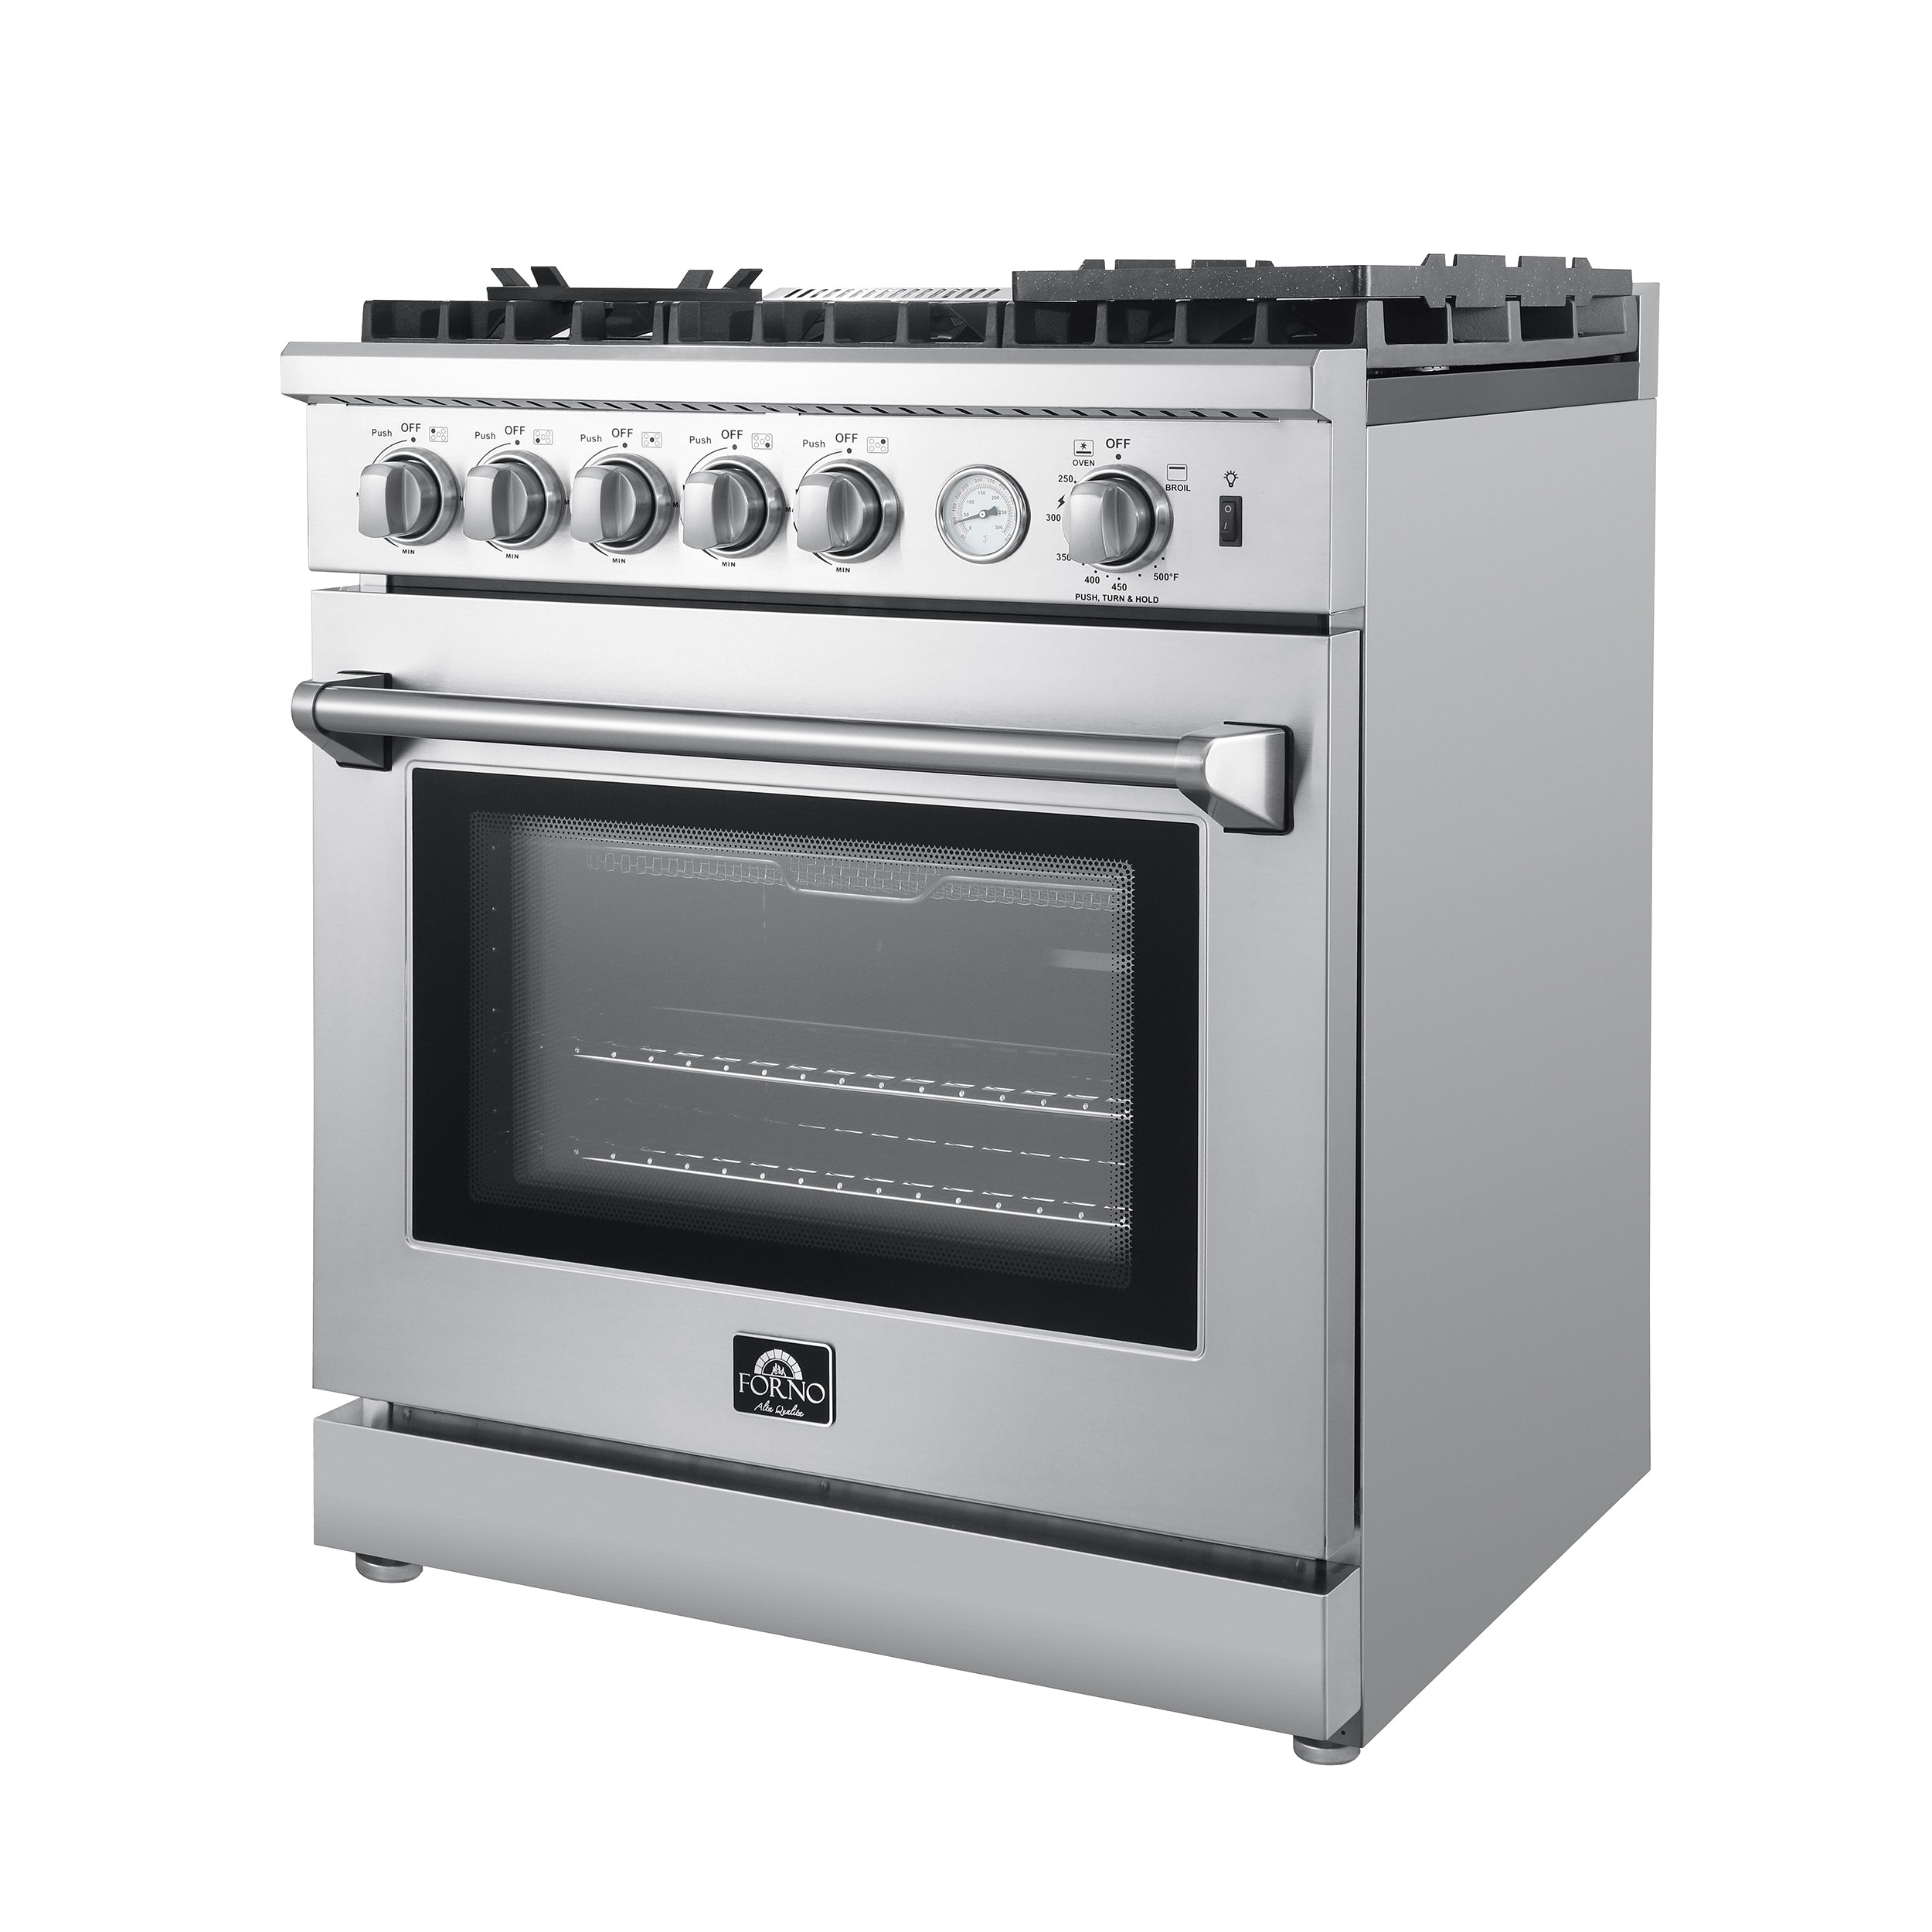 The Forno Lazio 30 in. Alta Qualita Freestanding Gas Range brings professional styling and quality into your home kitchen. 